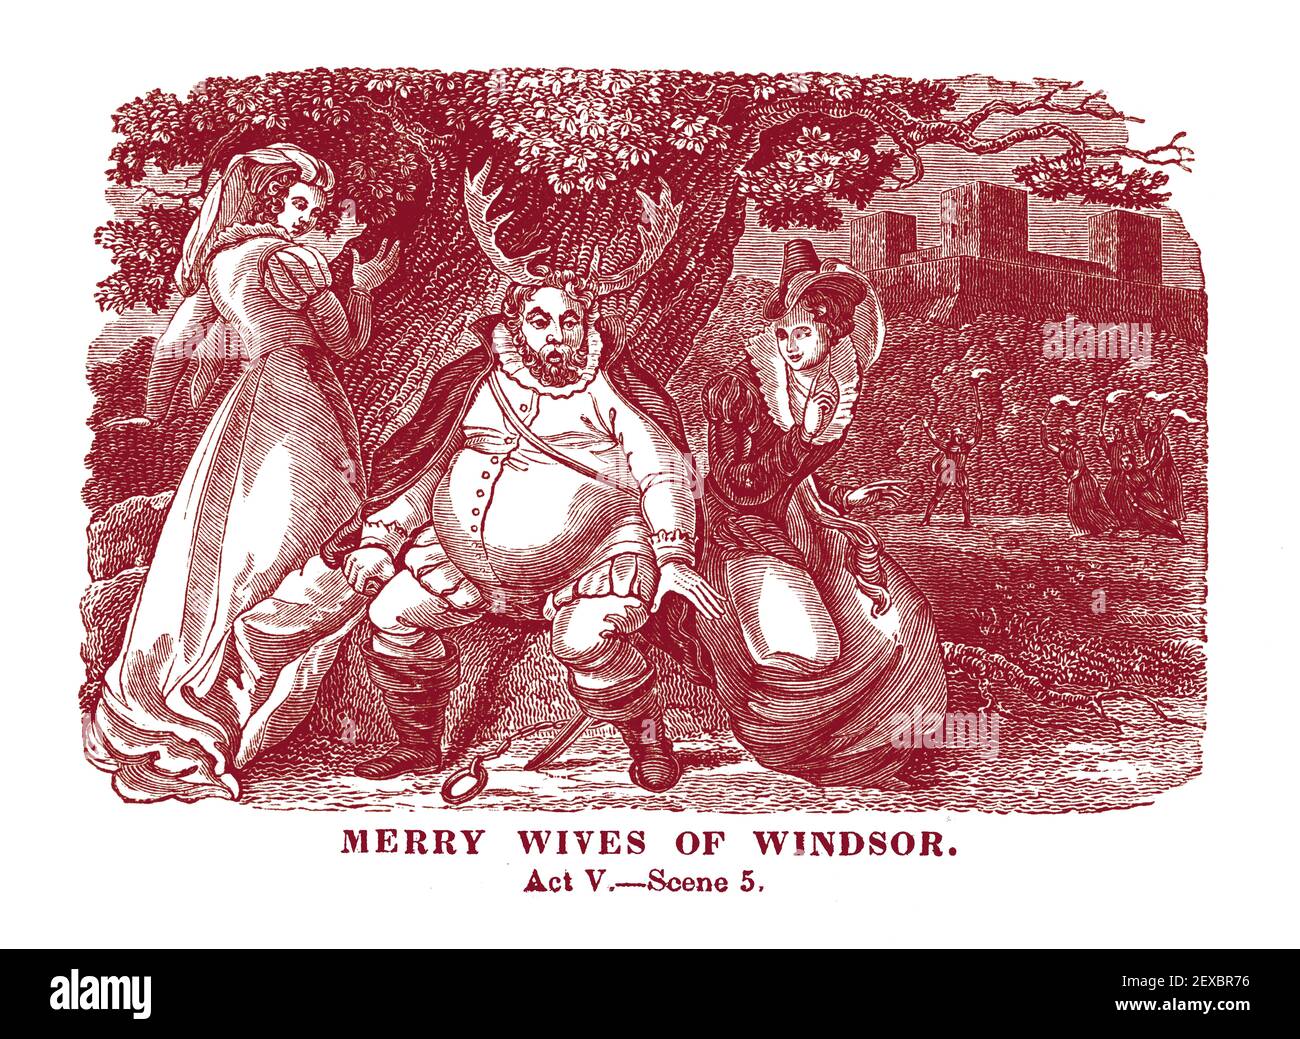 An 1834 engraving depicting a scene (Act V Scene 5) from William Shakespeare's play, 'Merry Wives of Windsor', digitally colorized. Stock Photo